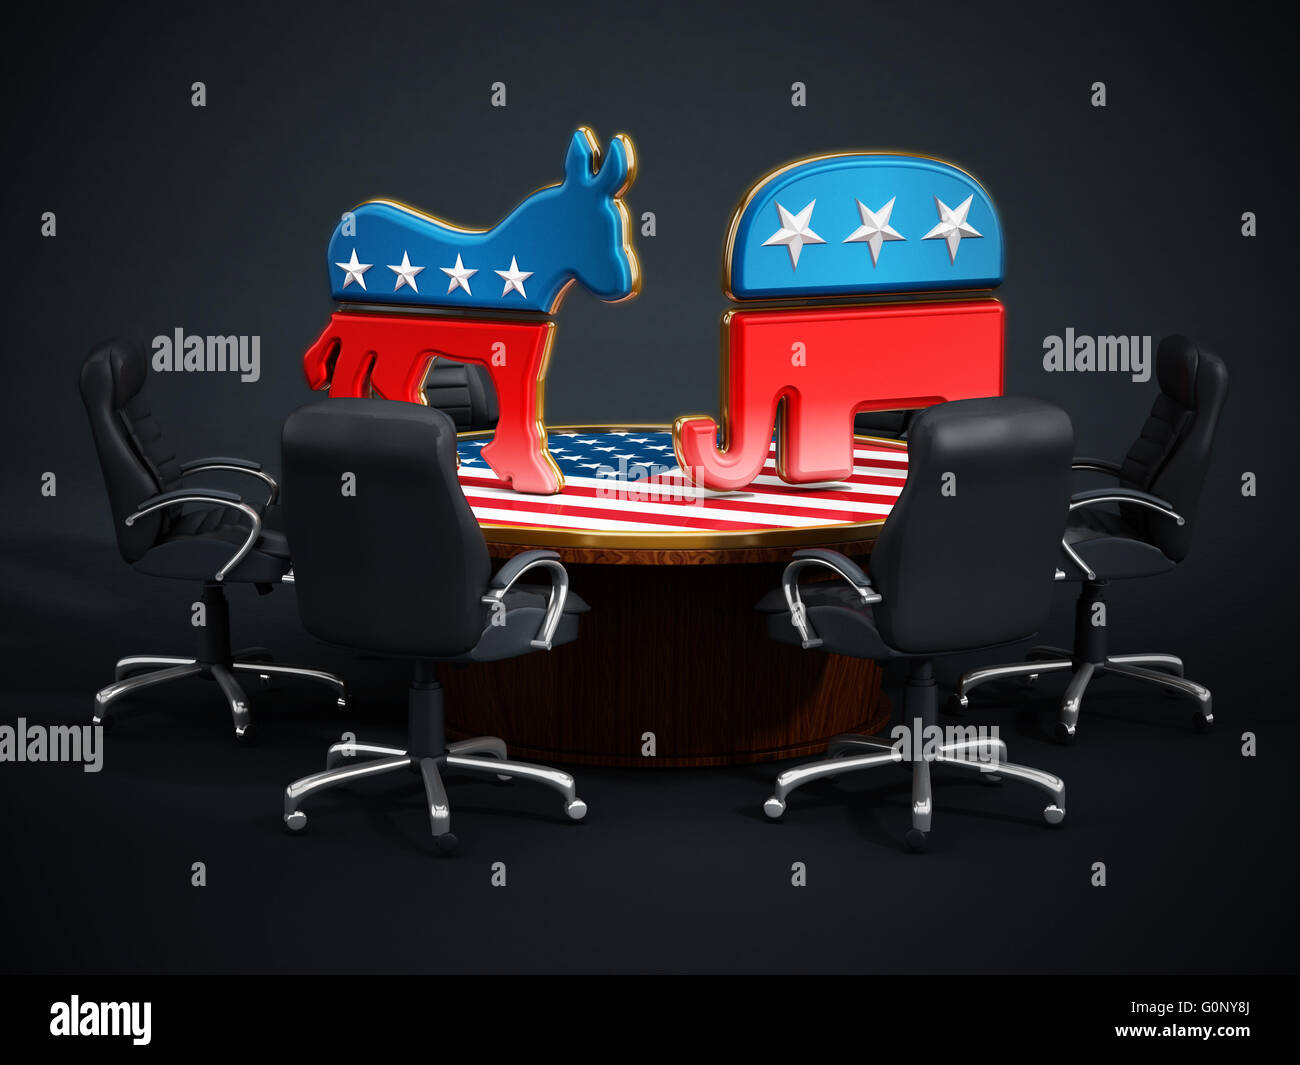 USA Political party symbols standing on American flag covered table. Stock Photo